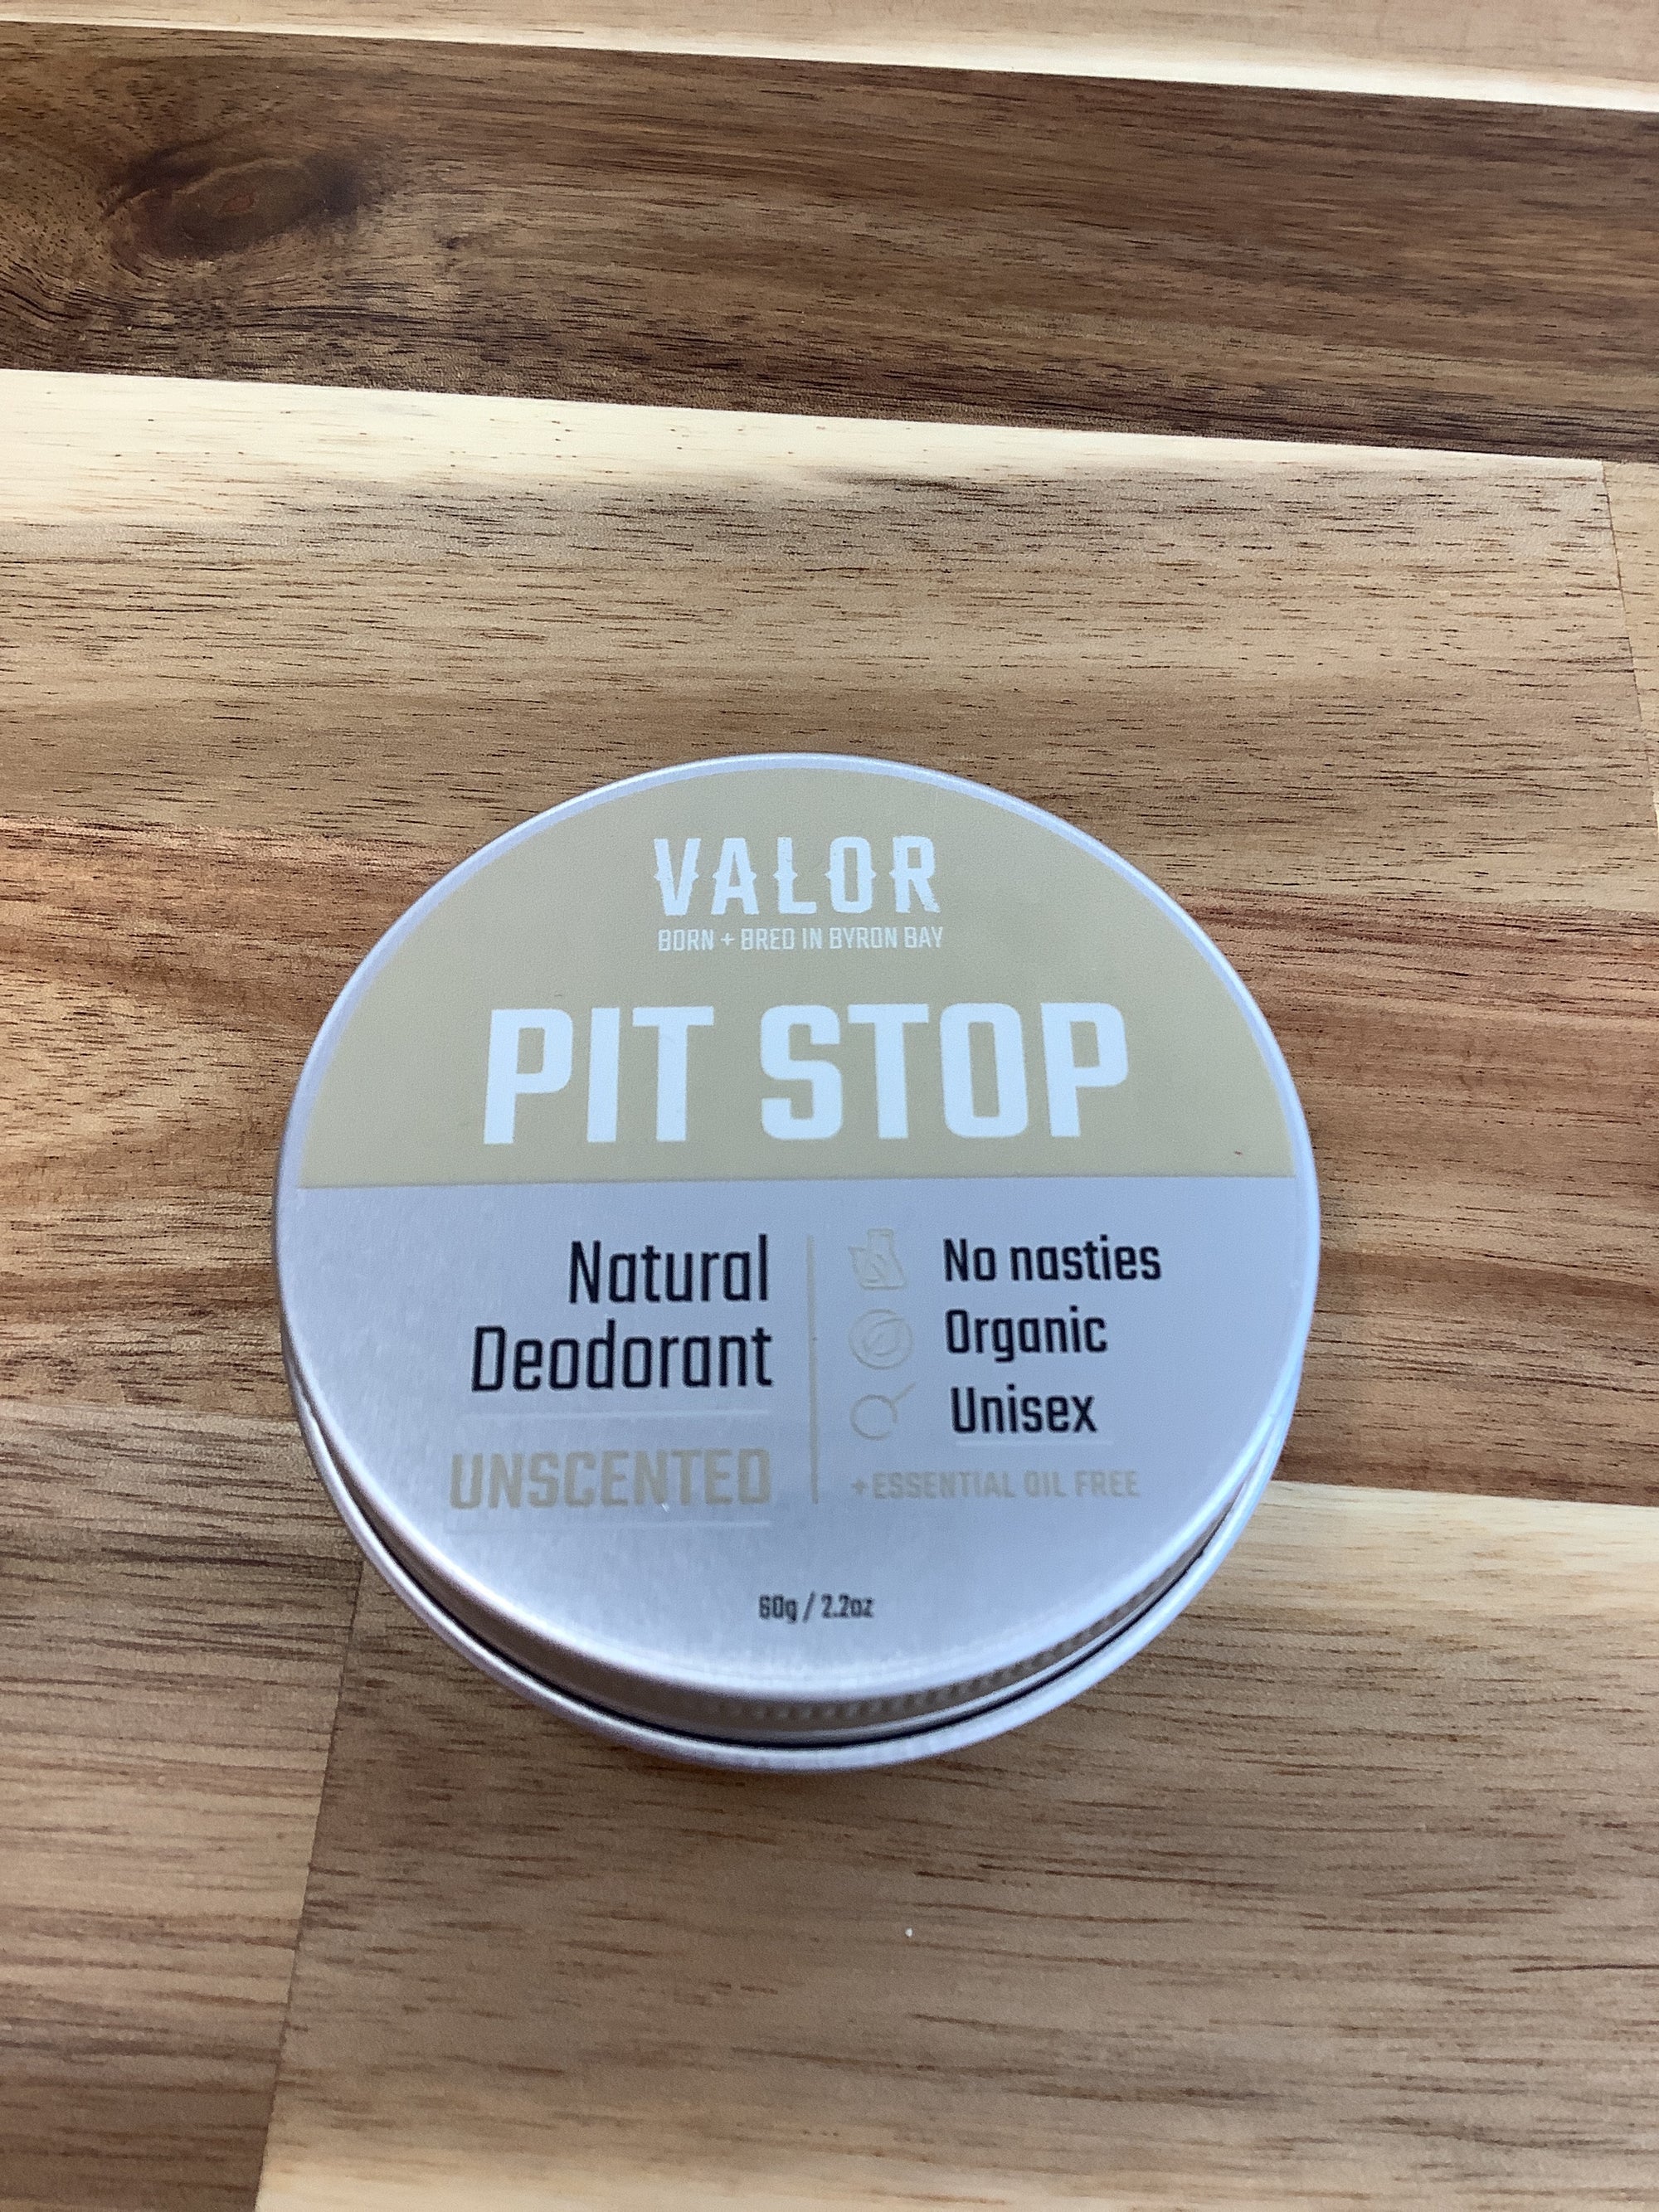 Pit Stop Deodorant - Unscented